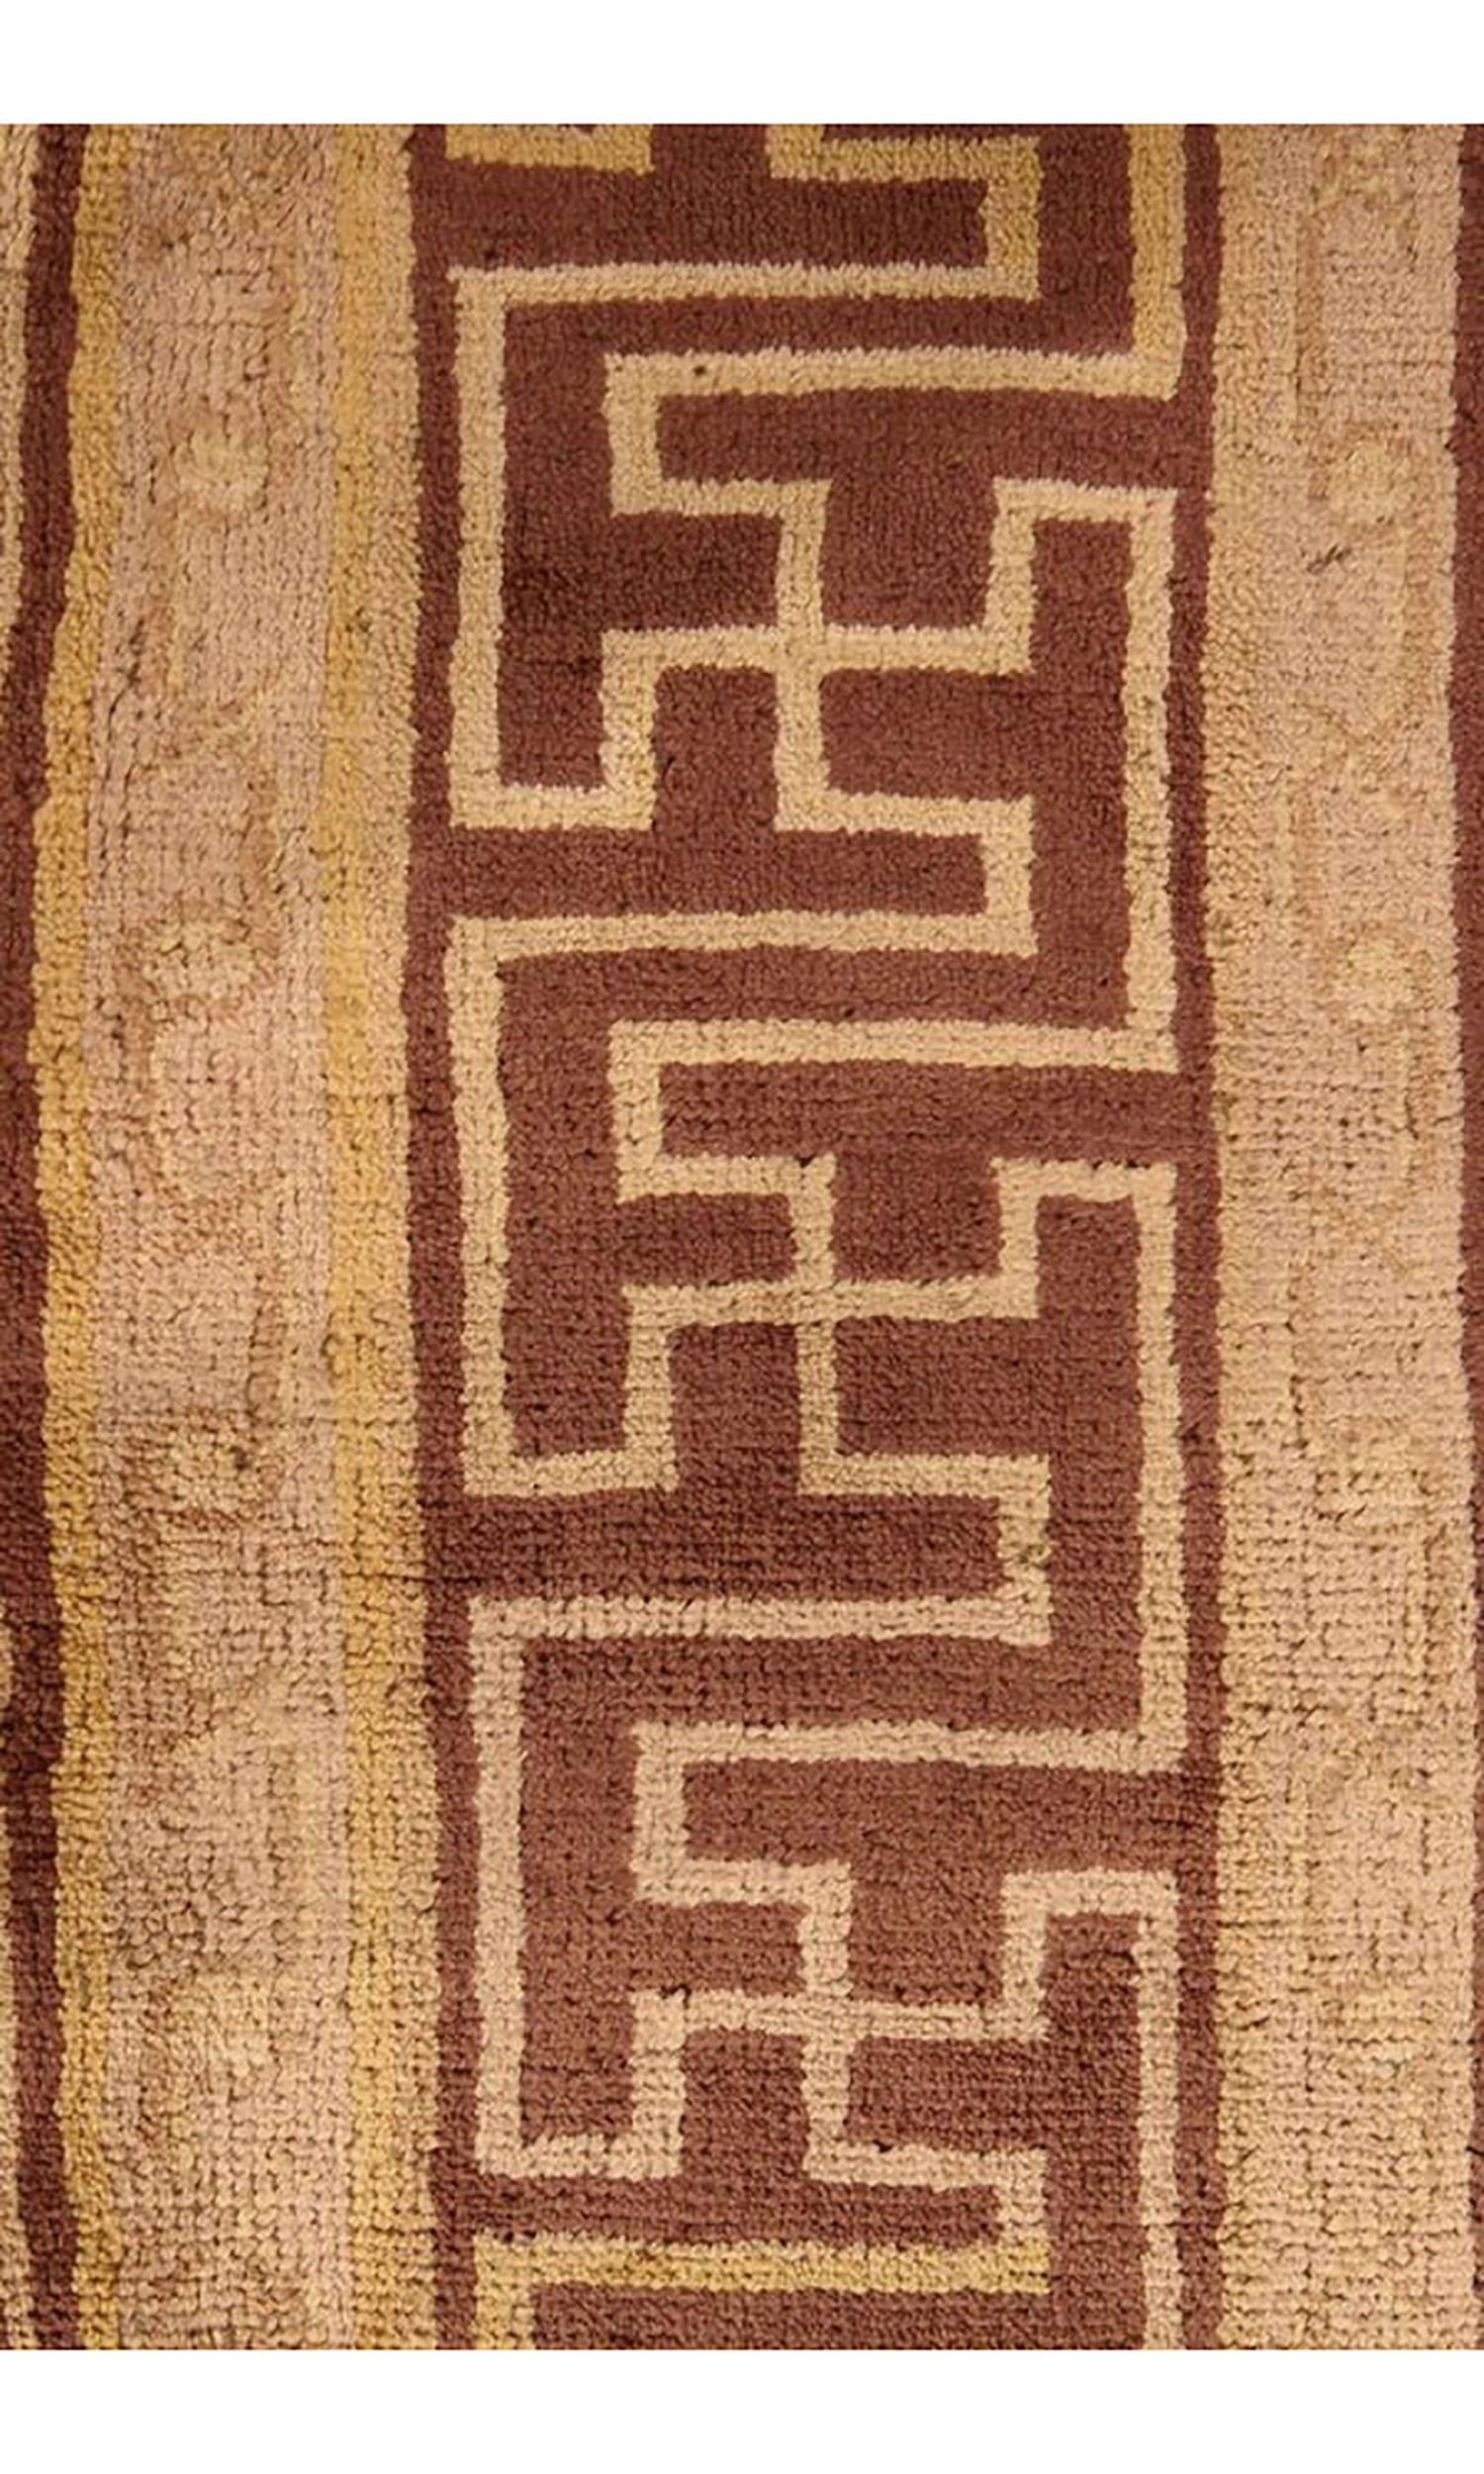 Hand-Knotted HandKnotted Antique Khotan Rug in Beige-Brown Geometric Pattern from Rug & Kilim